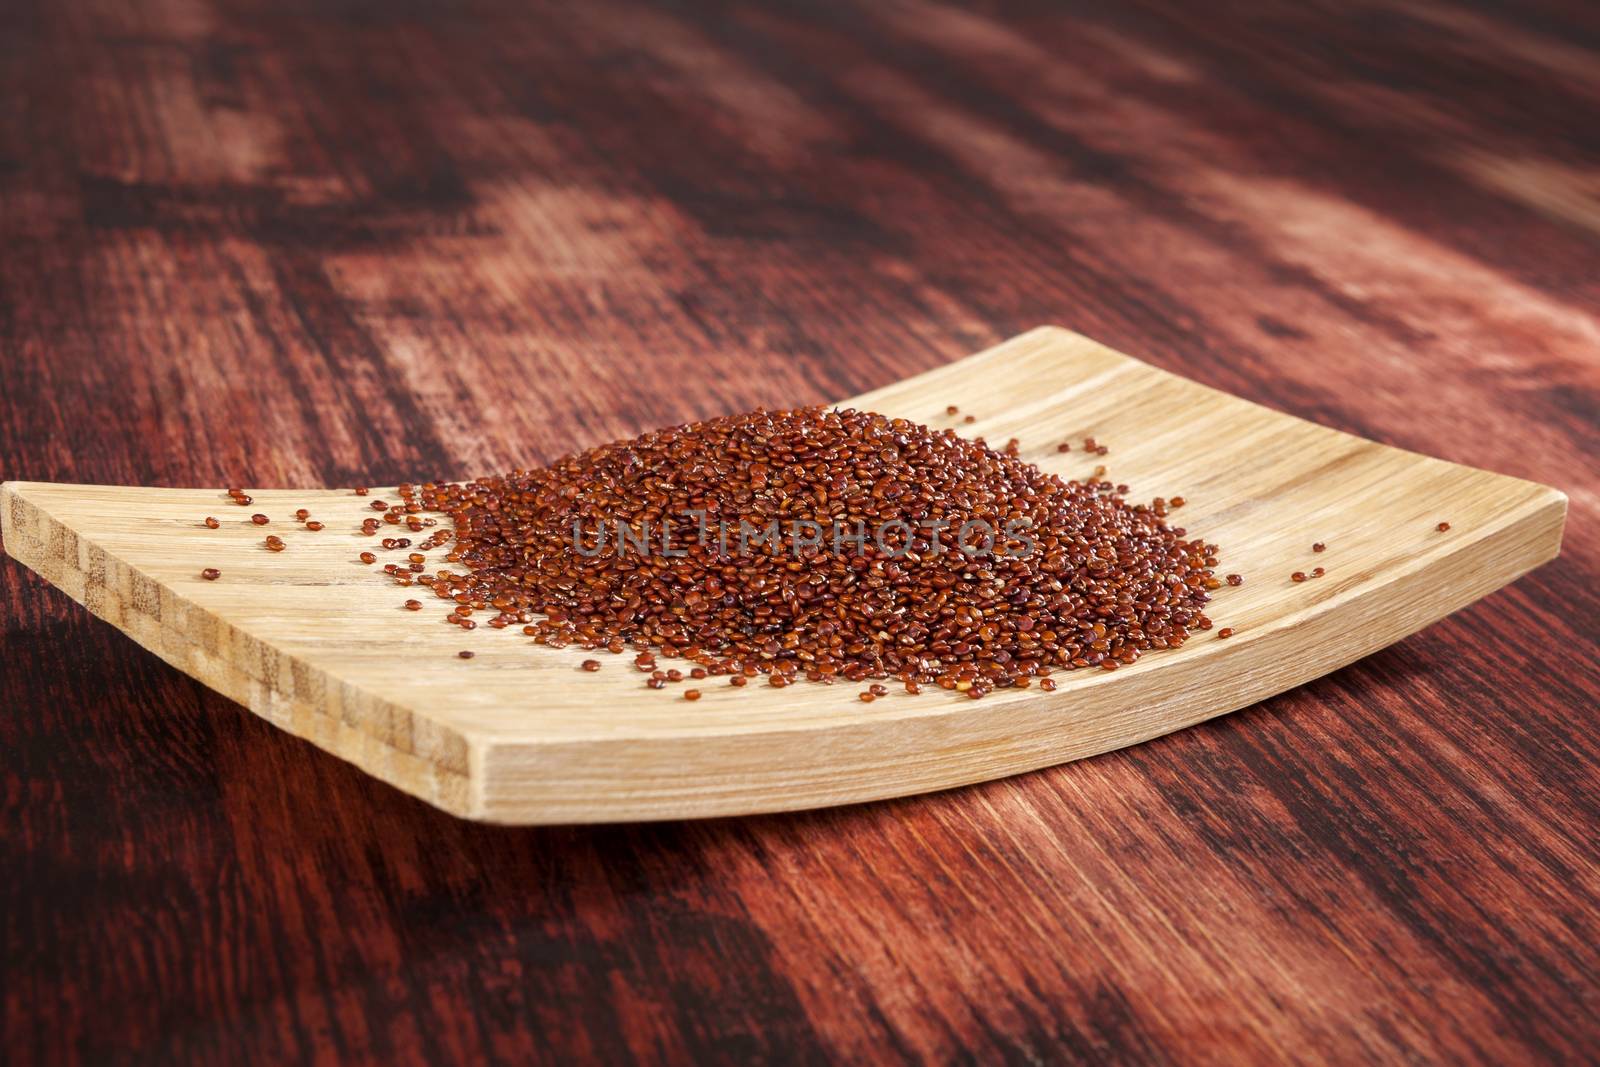 Quinoa on wooden background. by eskymaks